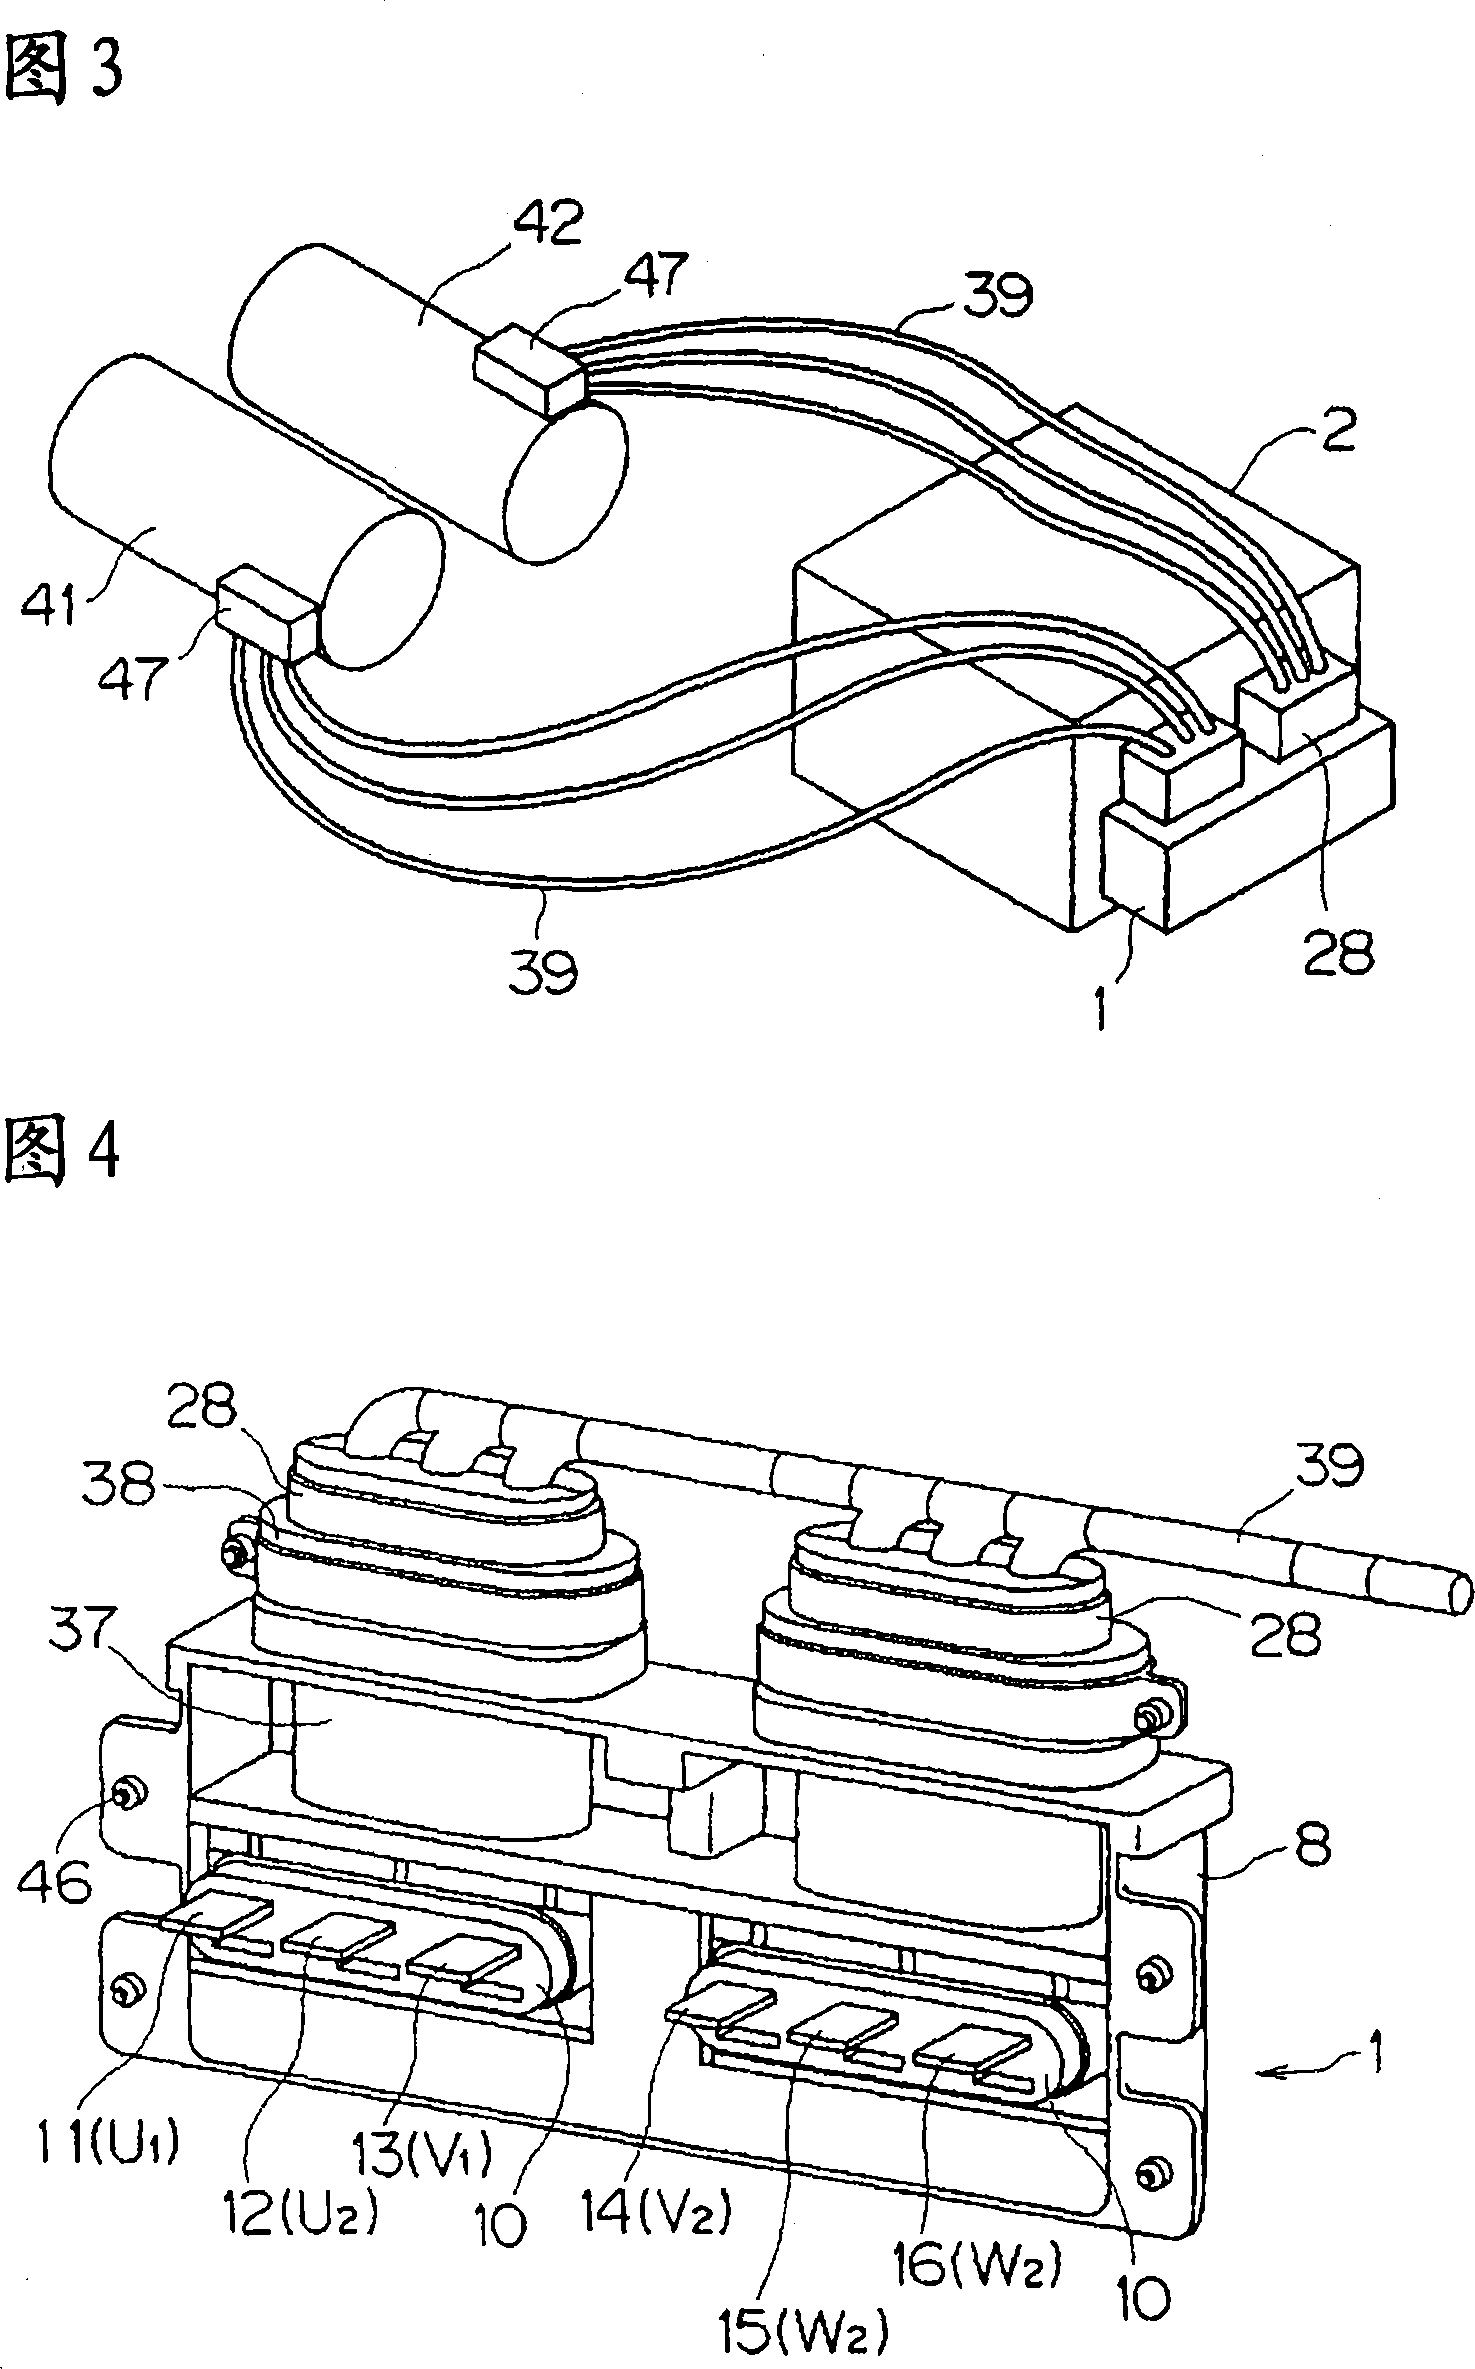 Apparatus direct mounting connector